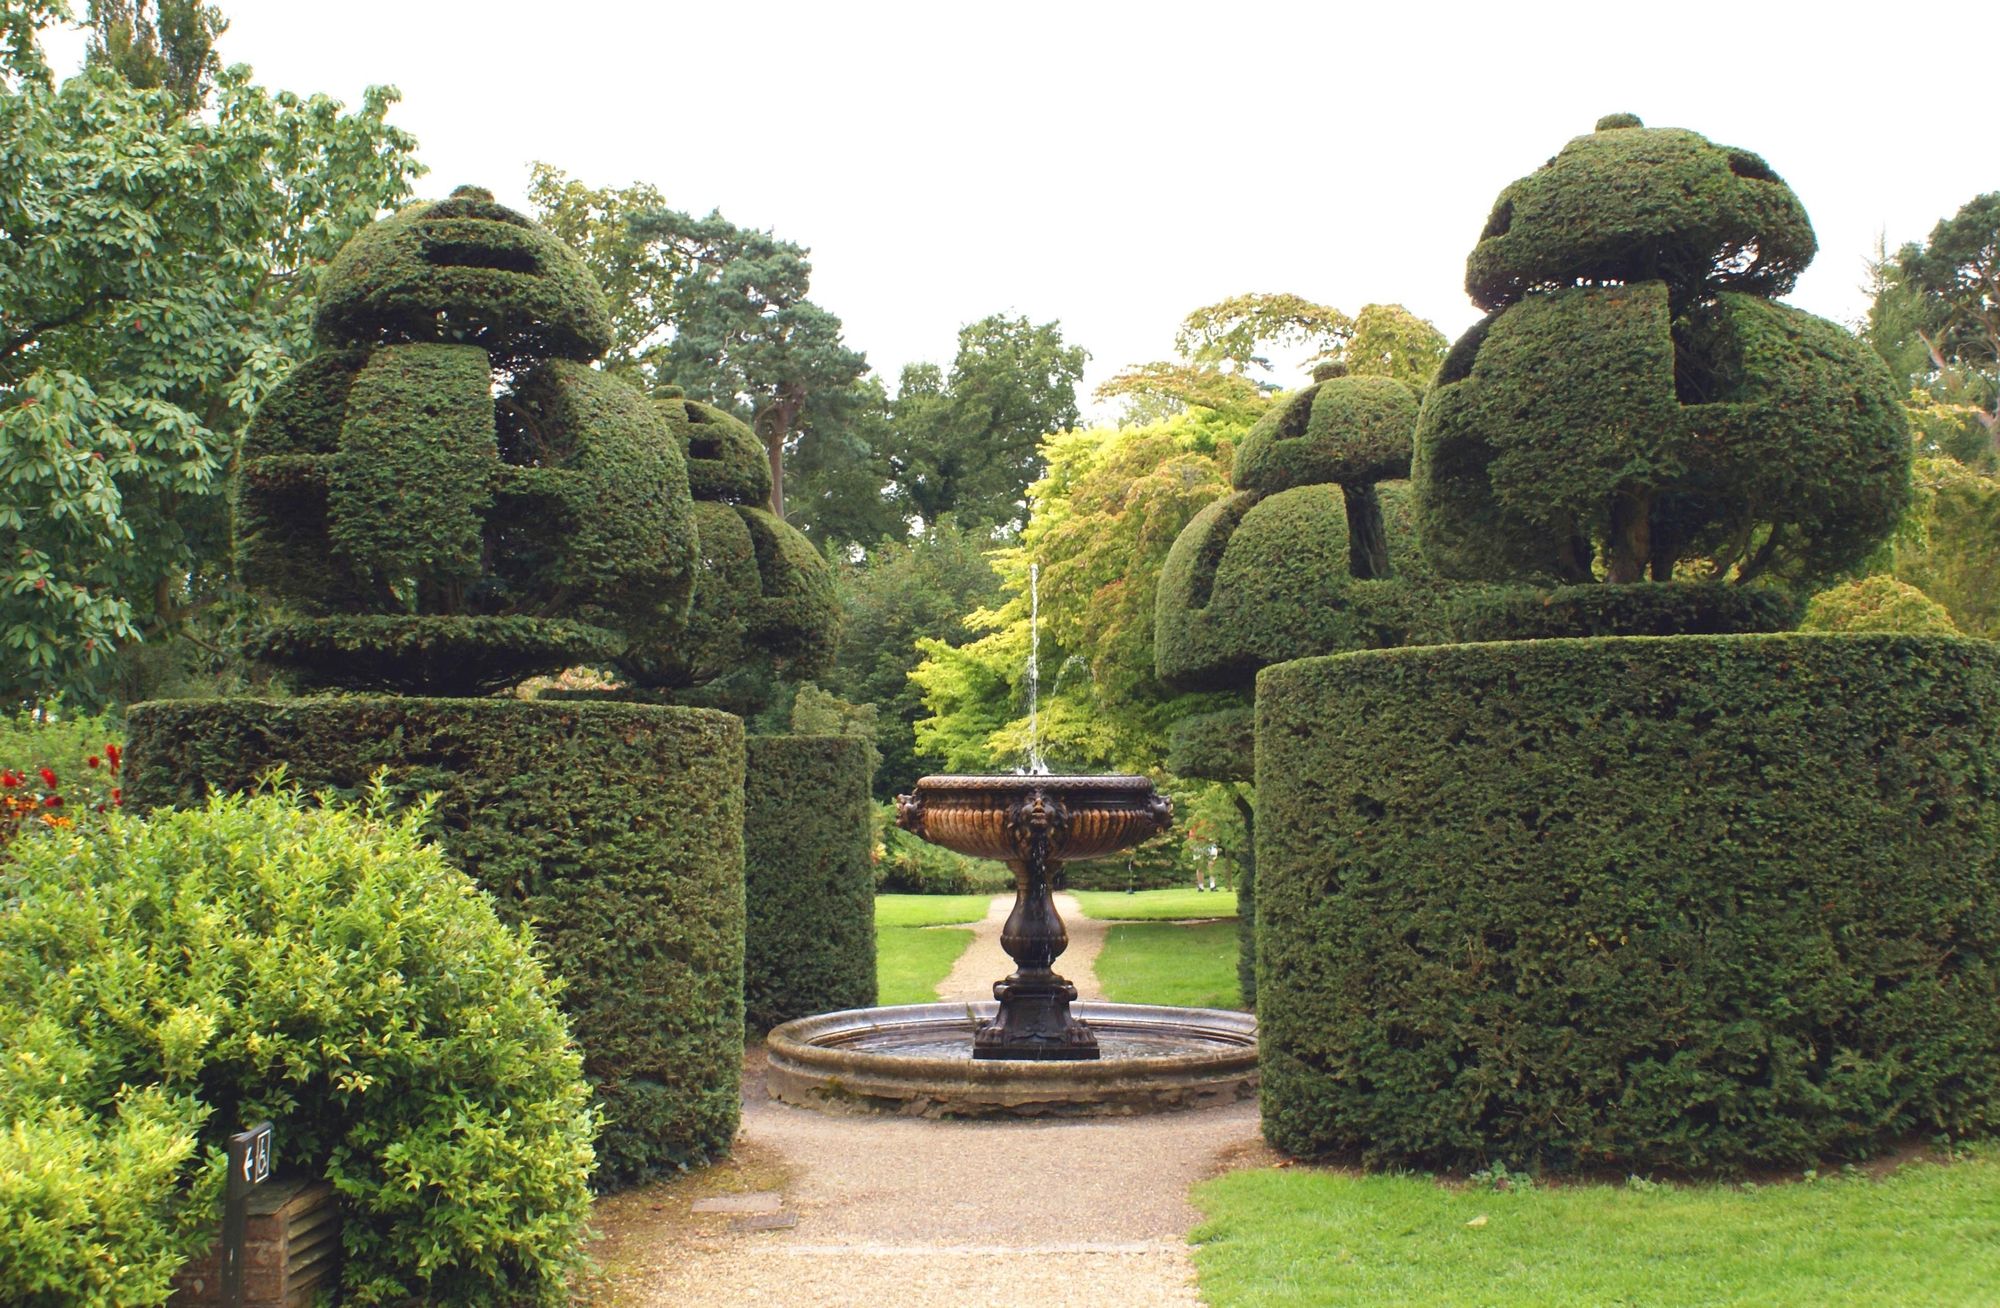 Sculptured fountain and yew topiary in a garden